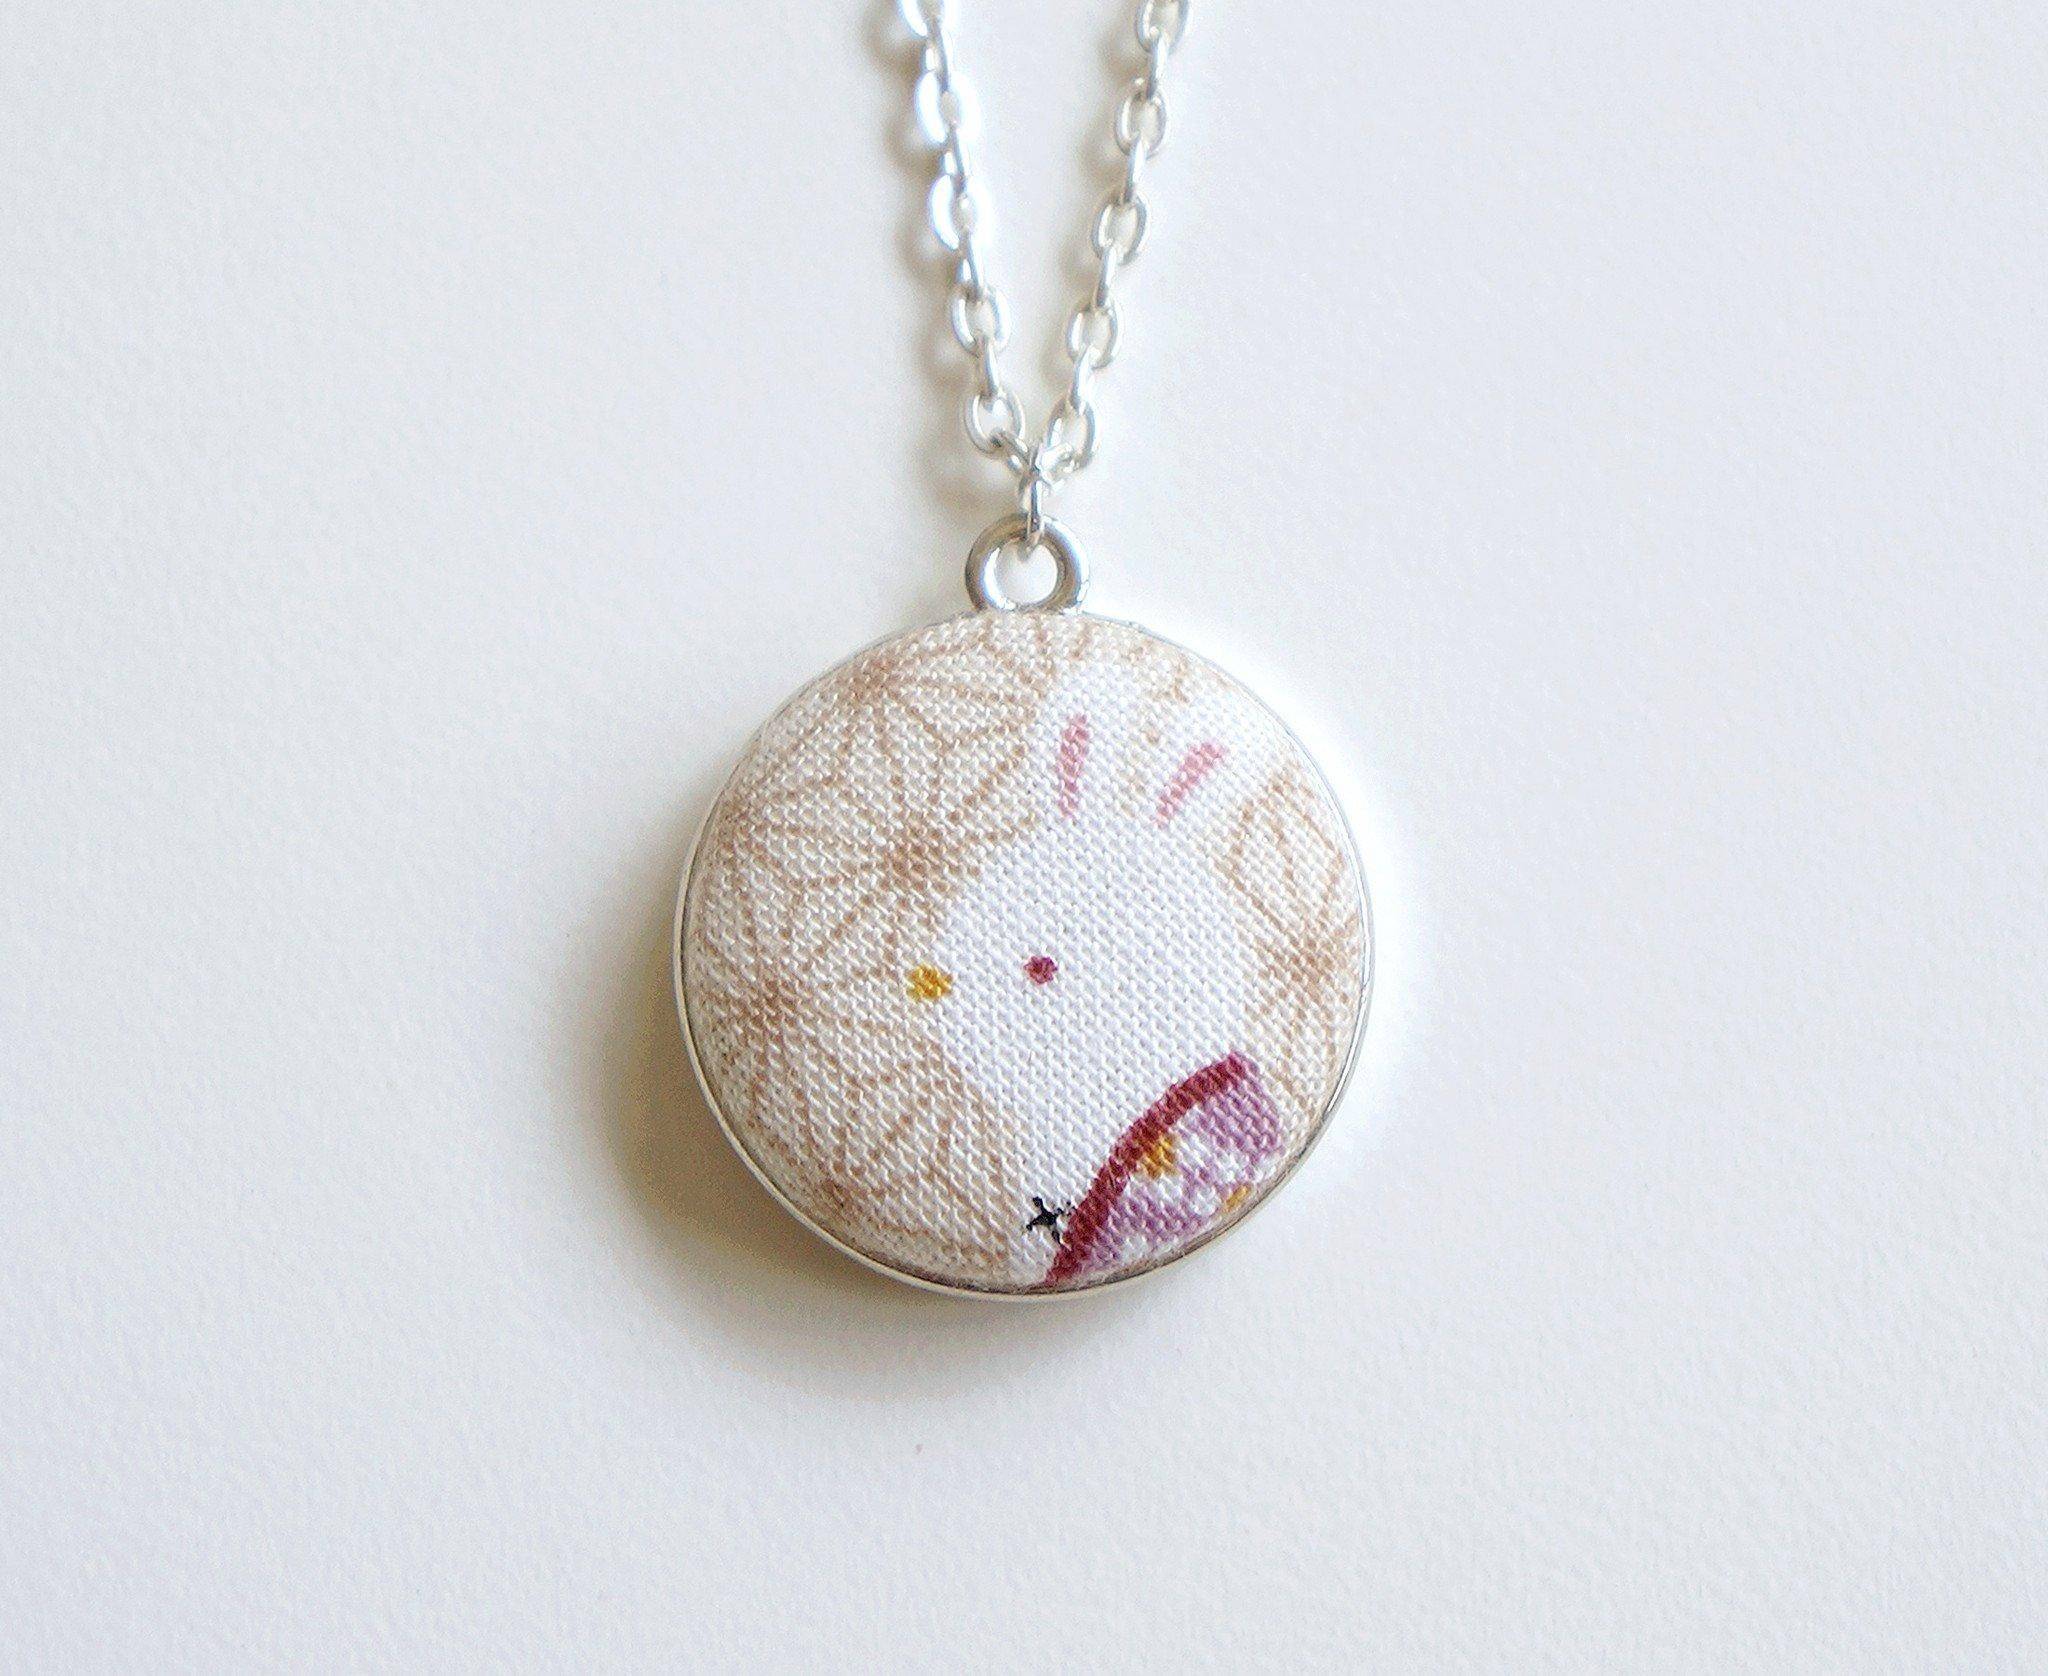 Maeko Bunny Handmade Fabric Button Necklace - Necklaces - Paperdaise Accessories - Naiise